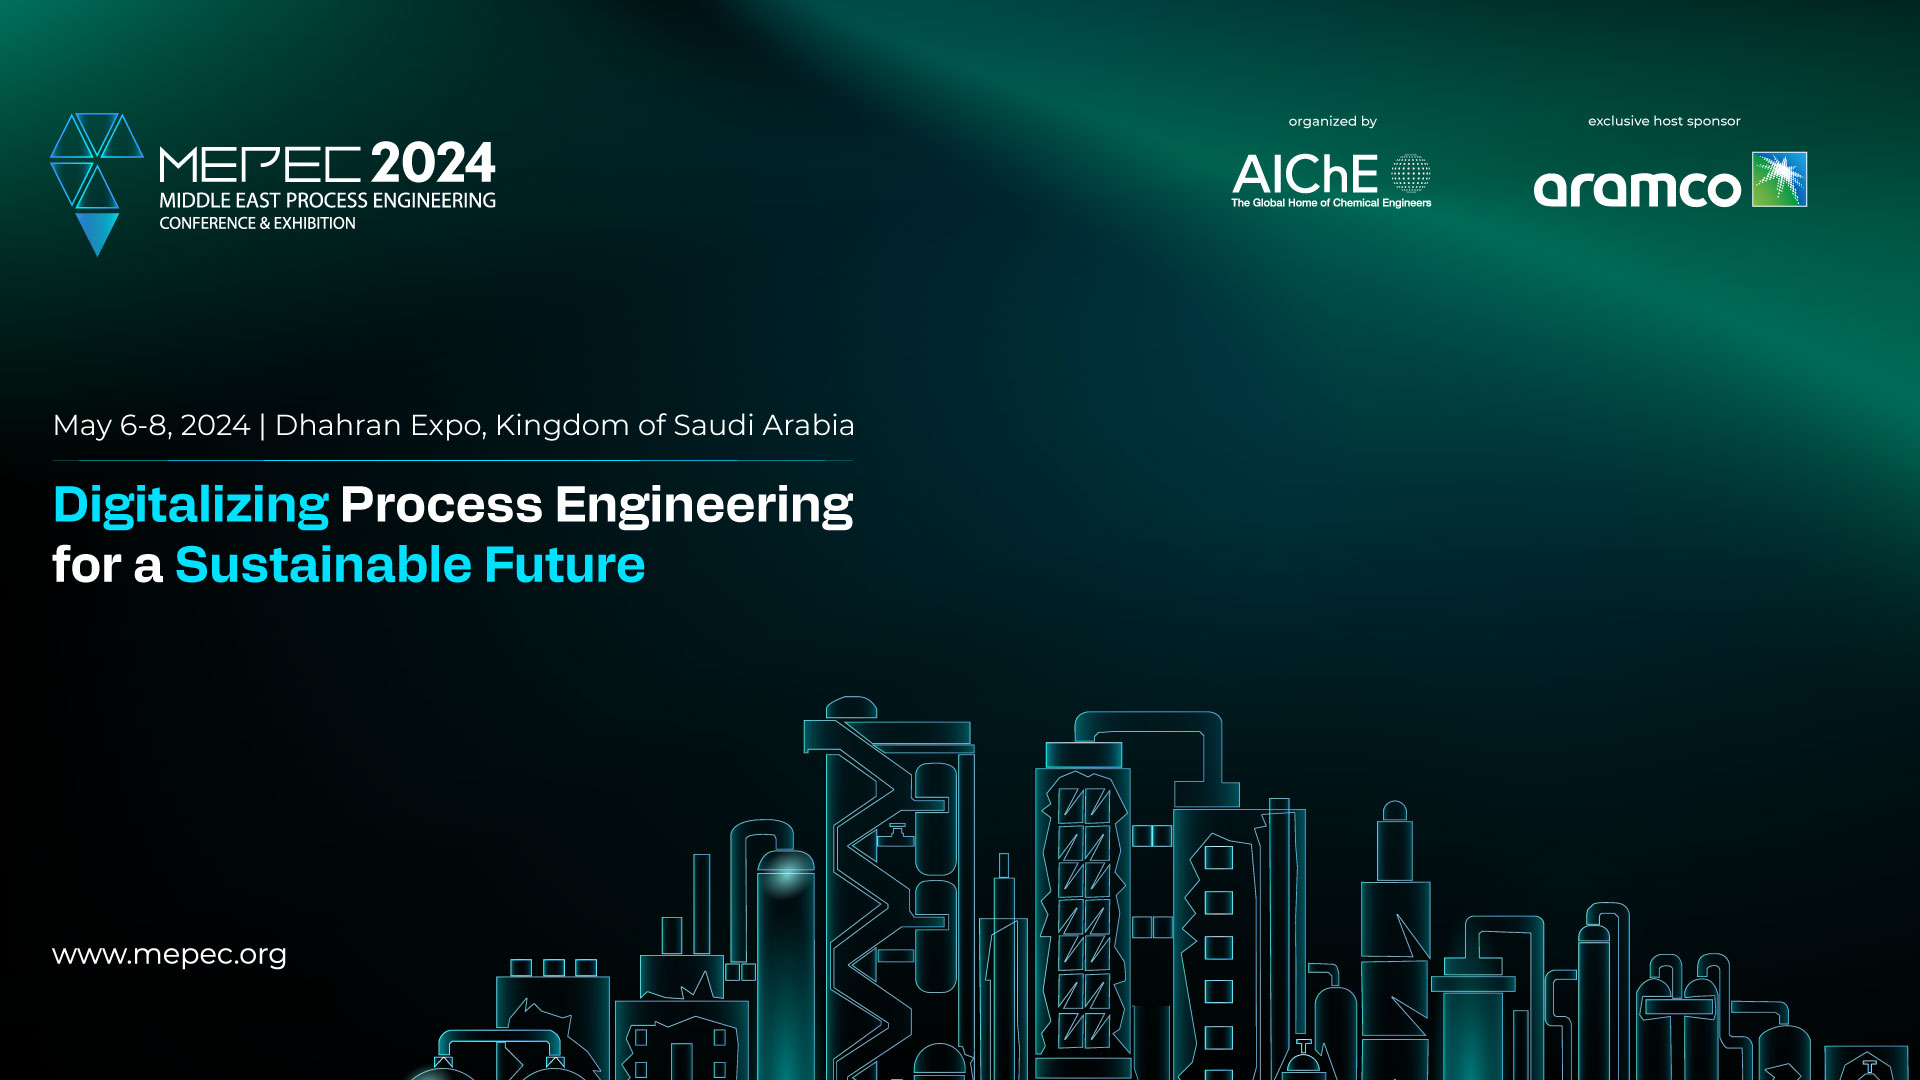 Middle East Process Engineering Conference & Exhibition - MEPEC 2024